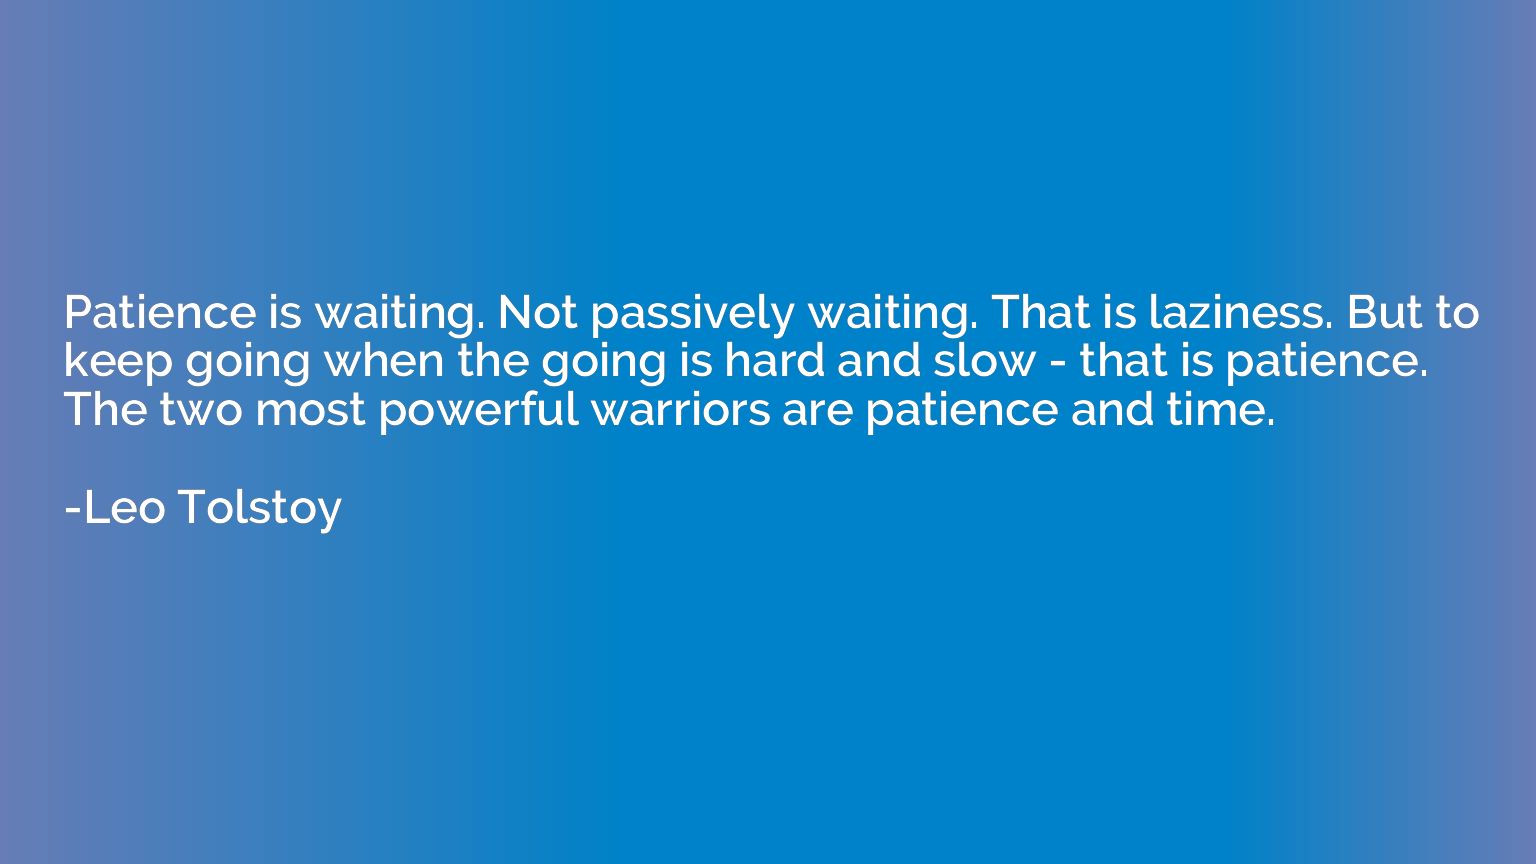 Patience is waiting. Not passively waiting. That is laziness